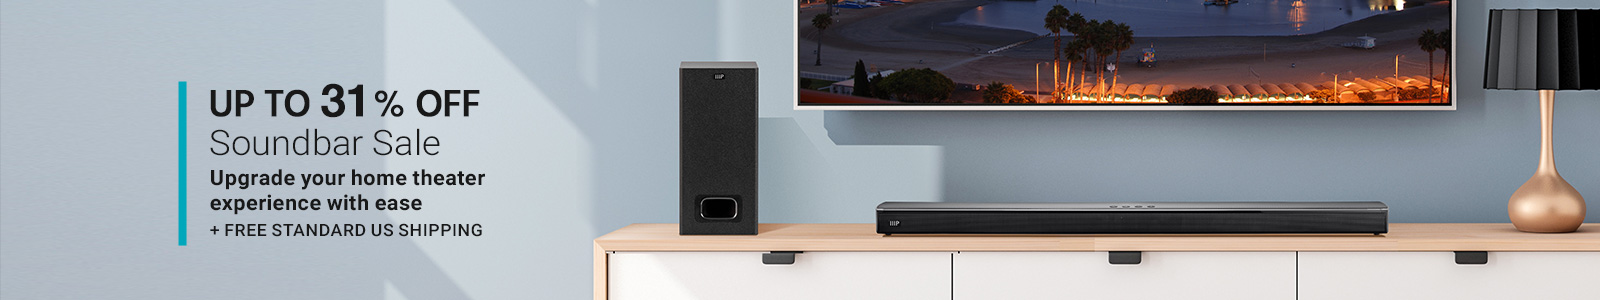 Up to xx% Off
Soundbar Sale
Upgrade your home theater experience with ease
+ Free Standard US Shipping
Shop Now